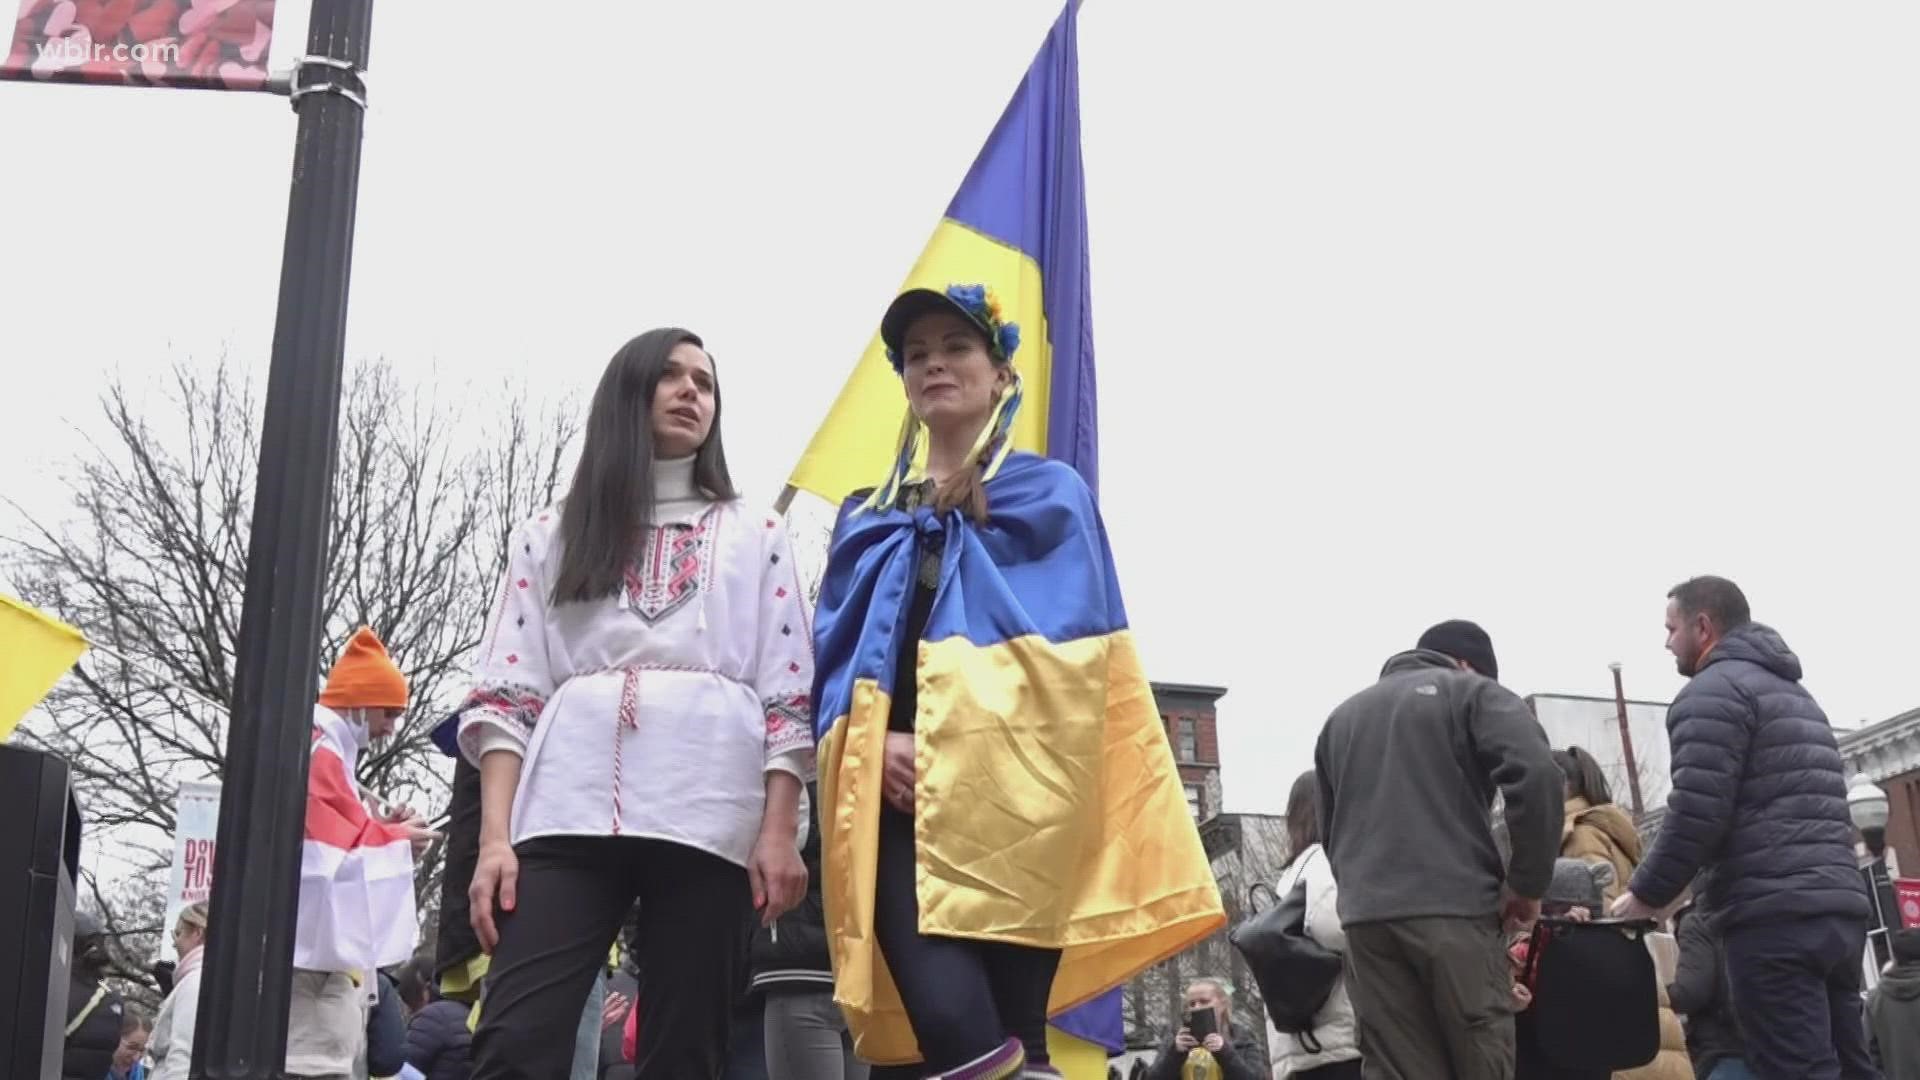 A number of demonstrations were held in Knoxville today protesting Russia's invasion of Ukraine.